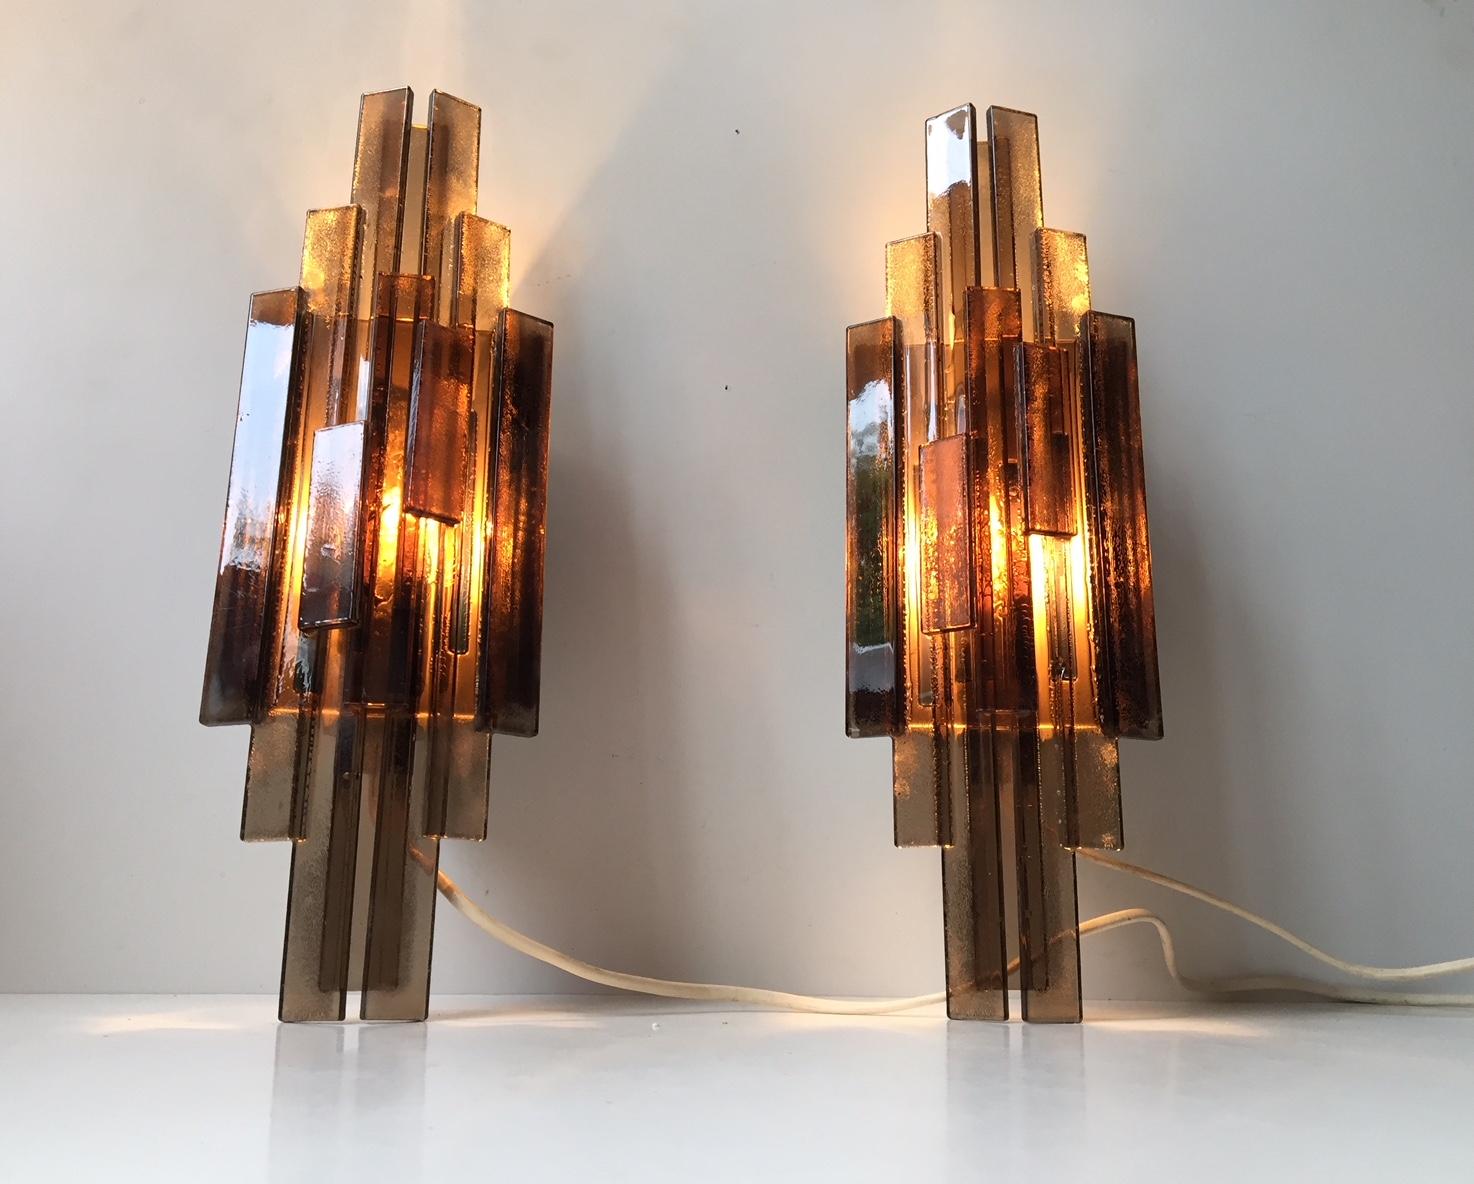 70s wall sconce